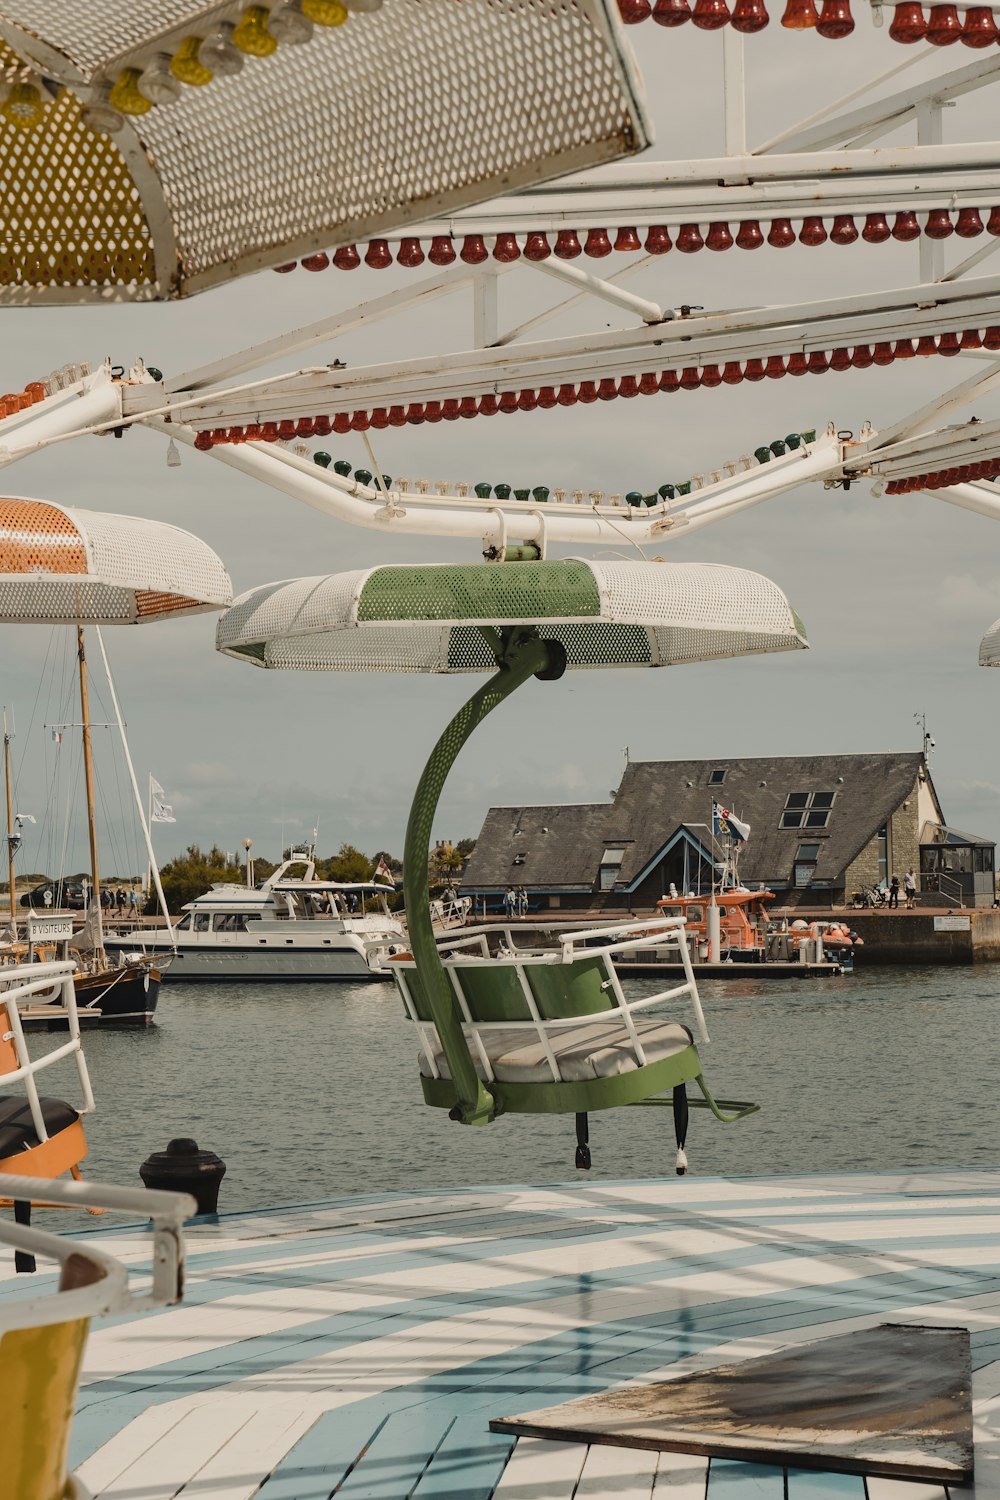 a bunch of chairs and umbrellas hanging over a body of water